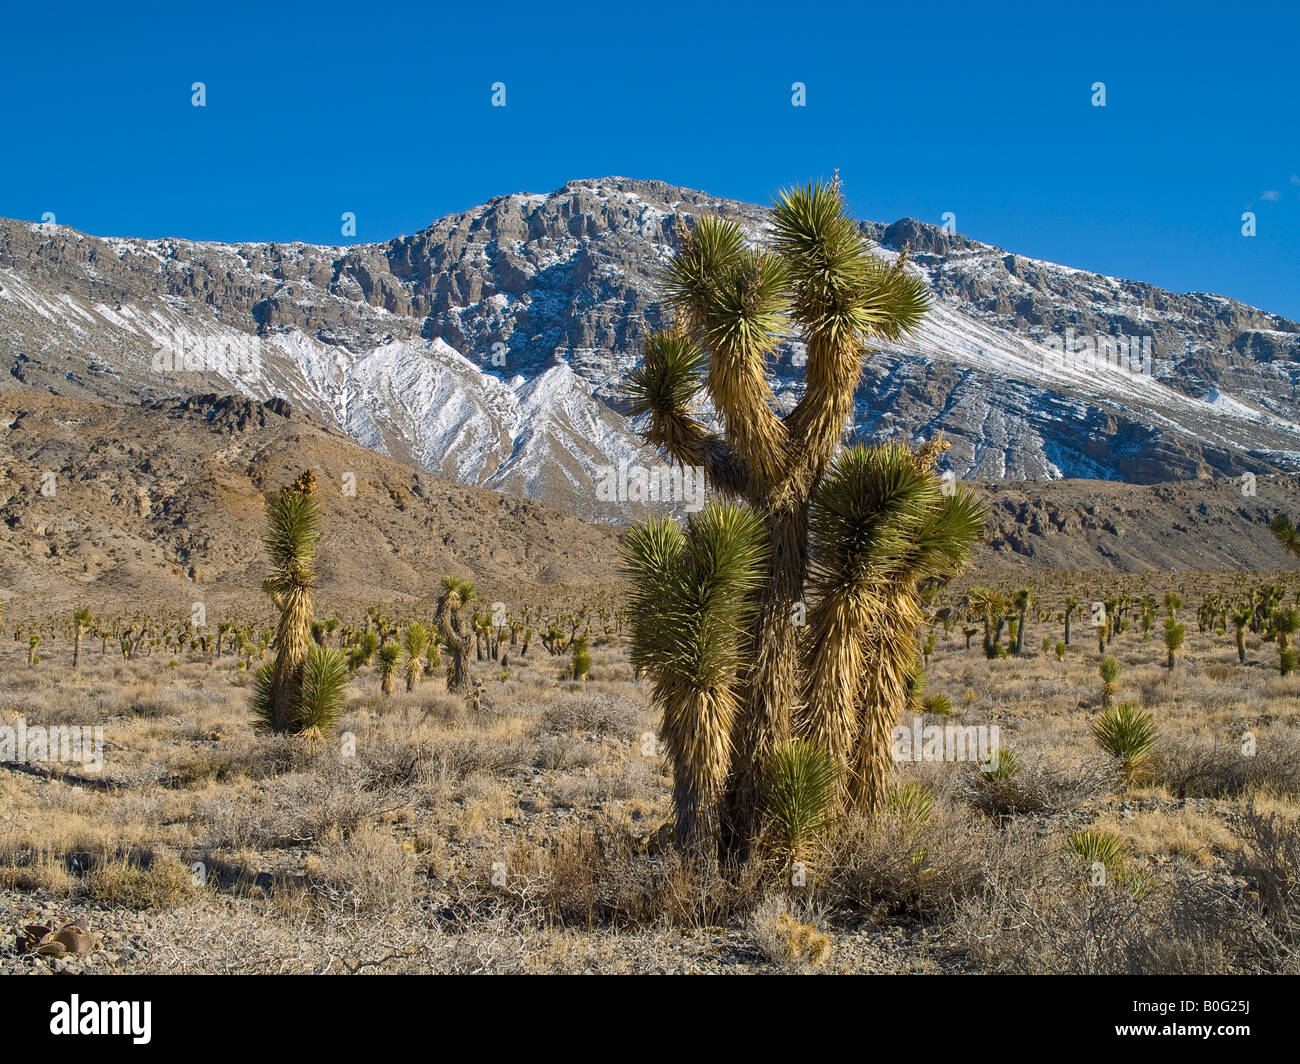 Joshua Trees Death Valley National Park Californie Nevada USA Banque D'Images